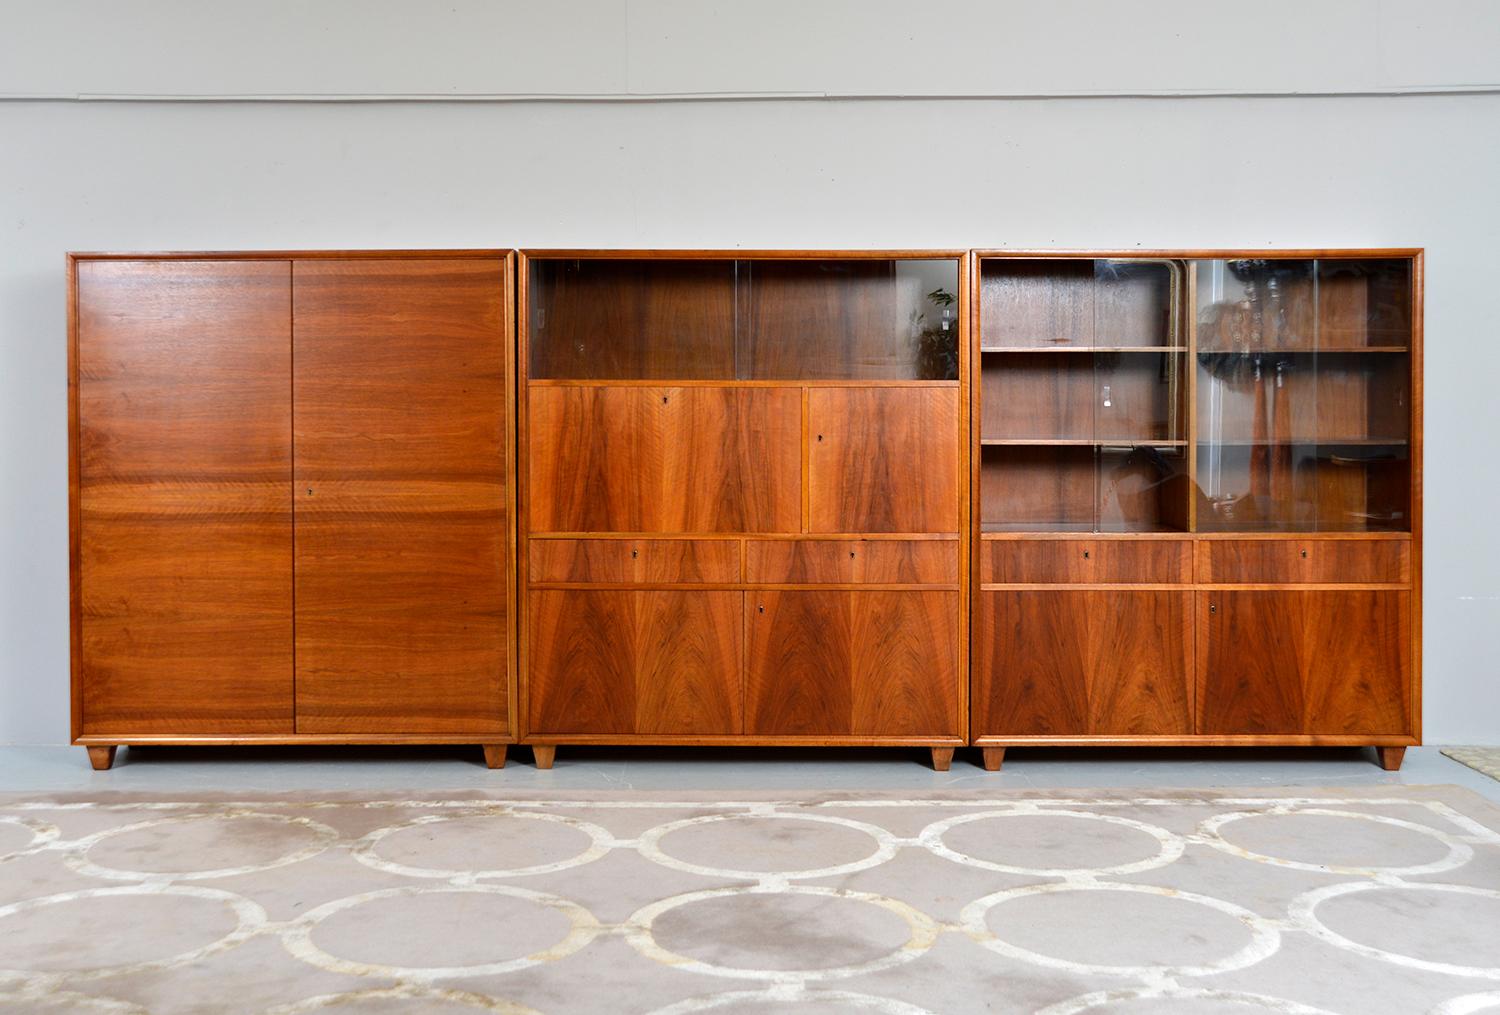 This rare living room suite comprises three individual pieces and is a super example of early European modernist furniture. Typical of the period, the suite has a Minimalist appearance devoid of unnecessary ornament, celebrating the natural